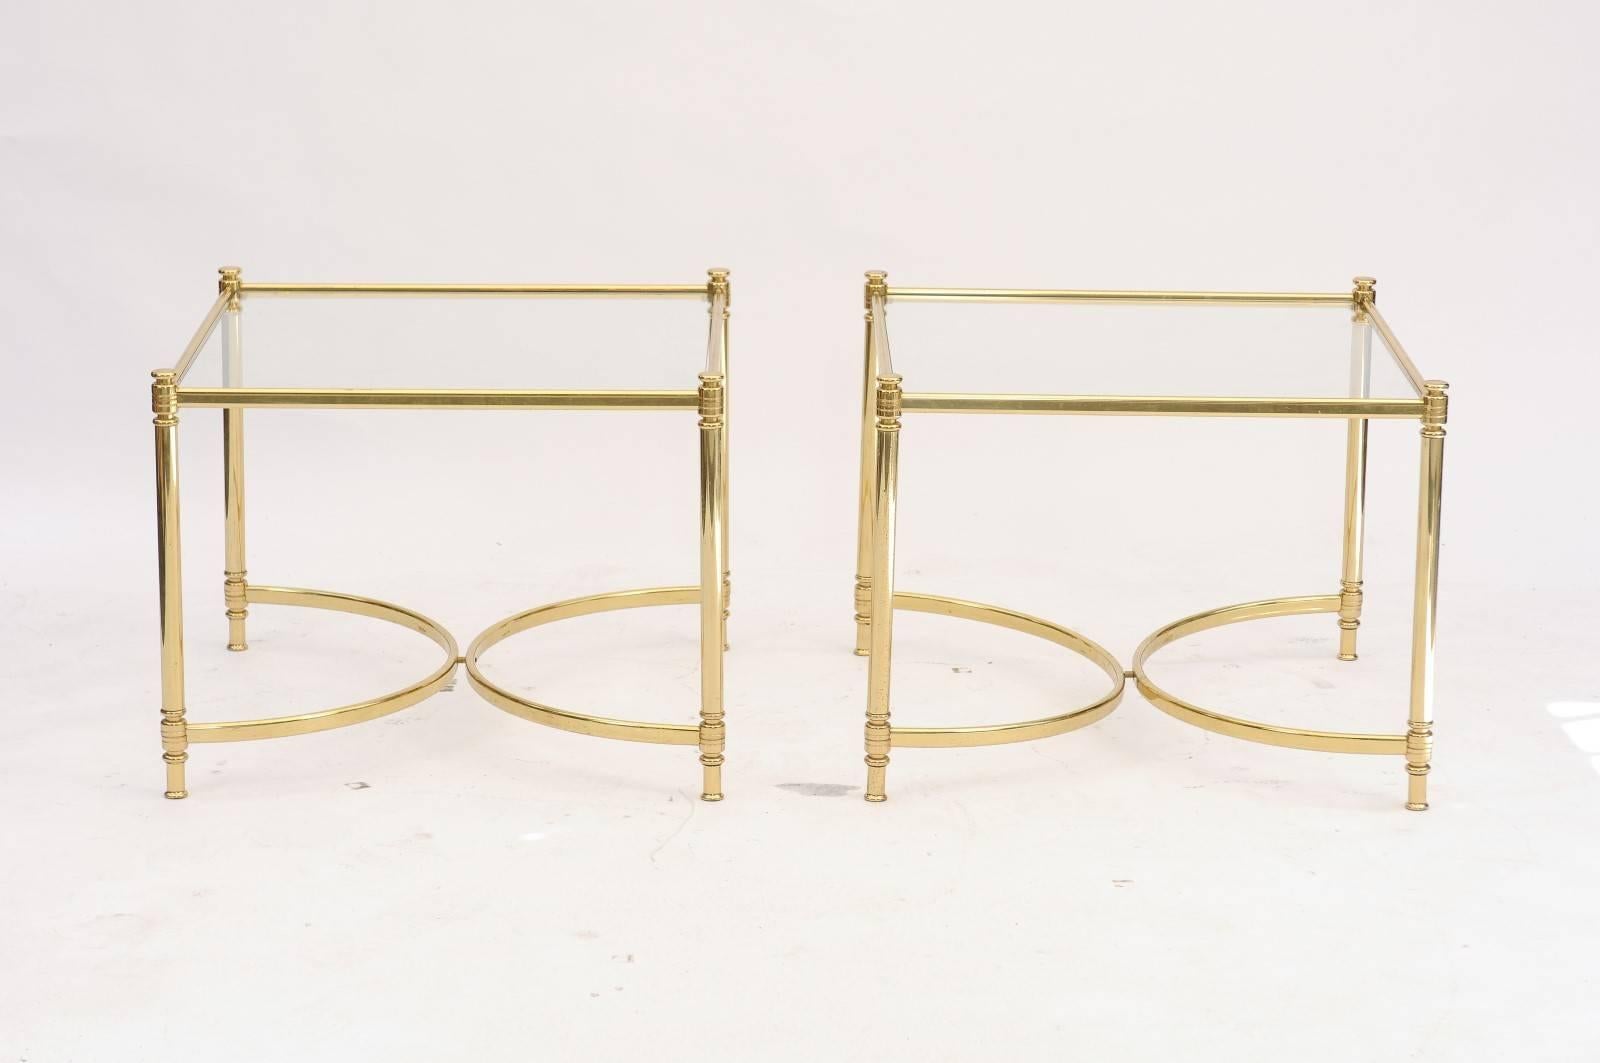 20th Century Pair of French 1970s Square Brass and Glass Side Tables with Demilune Stretchers